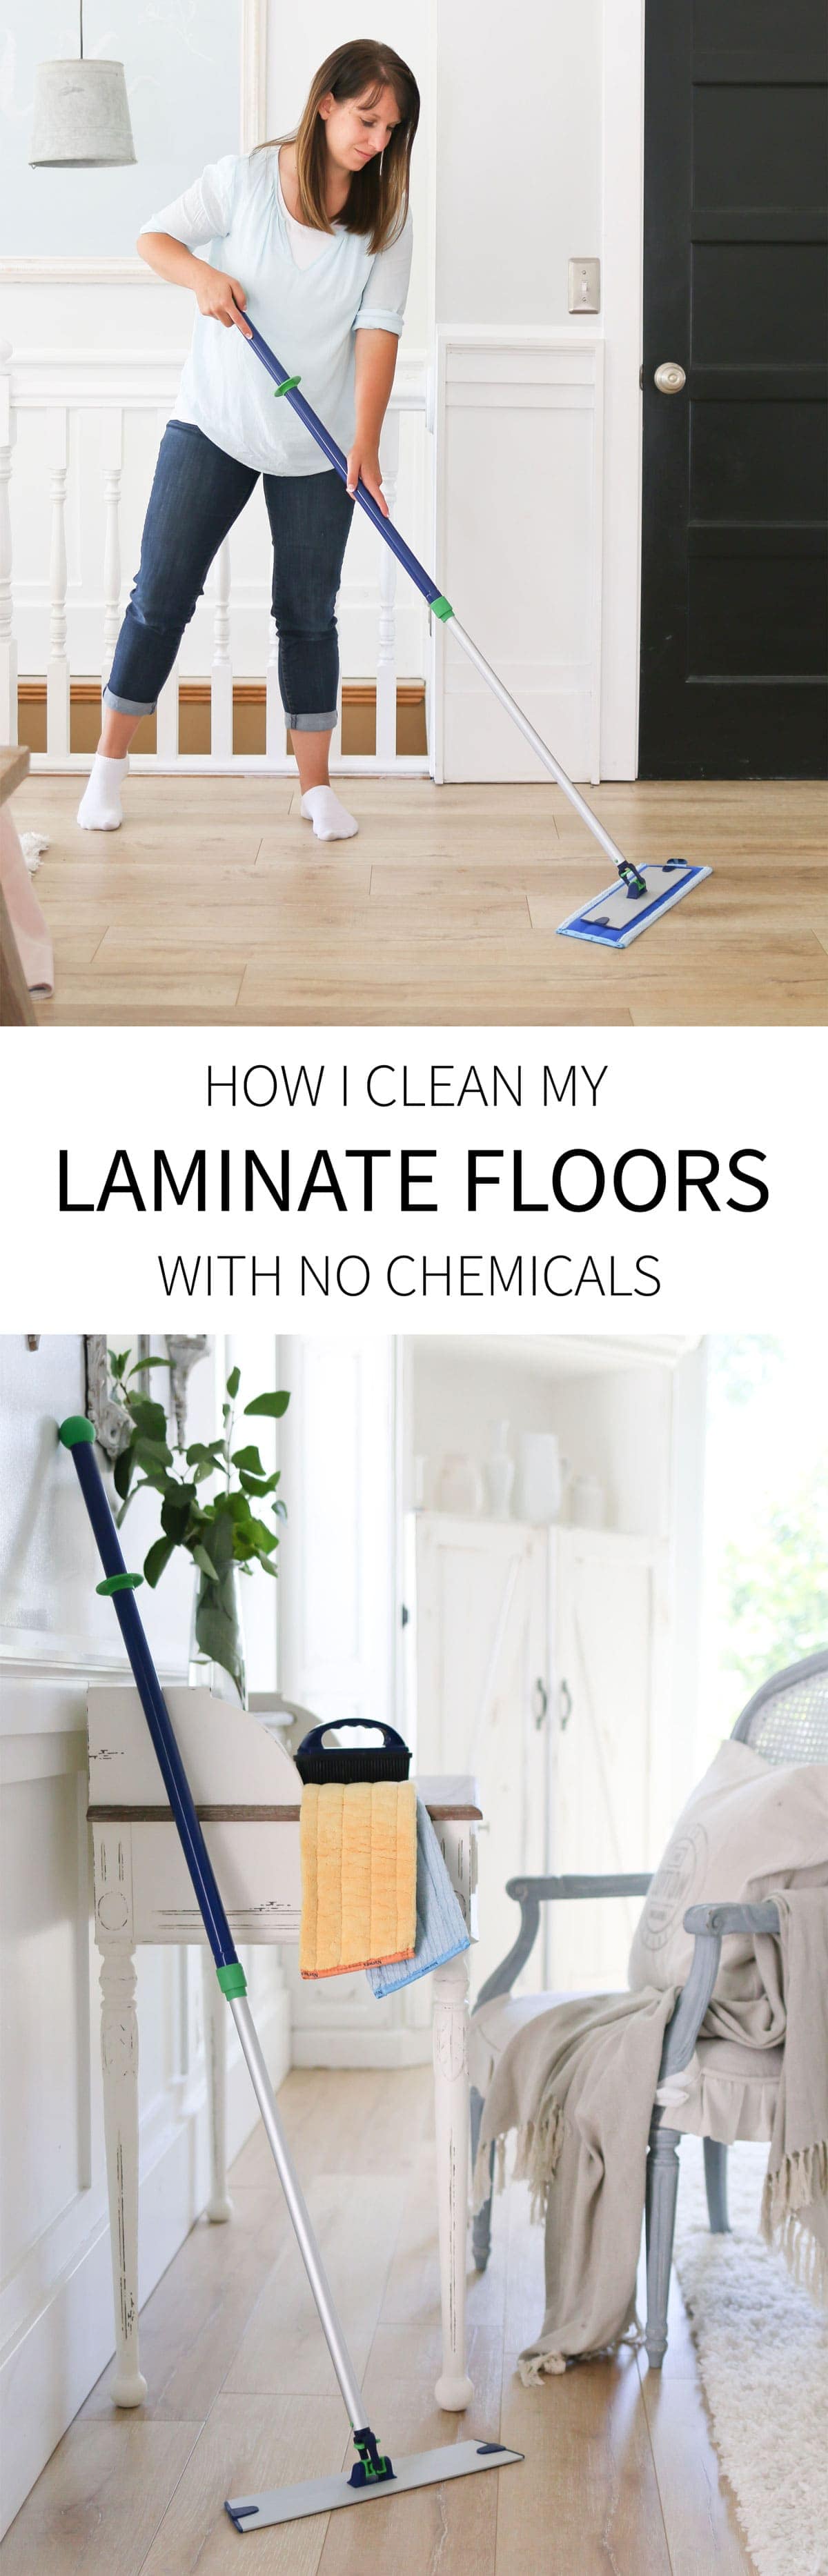 How I clean laminate flooring without the use of any chemicals!